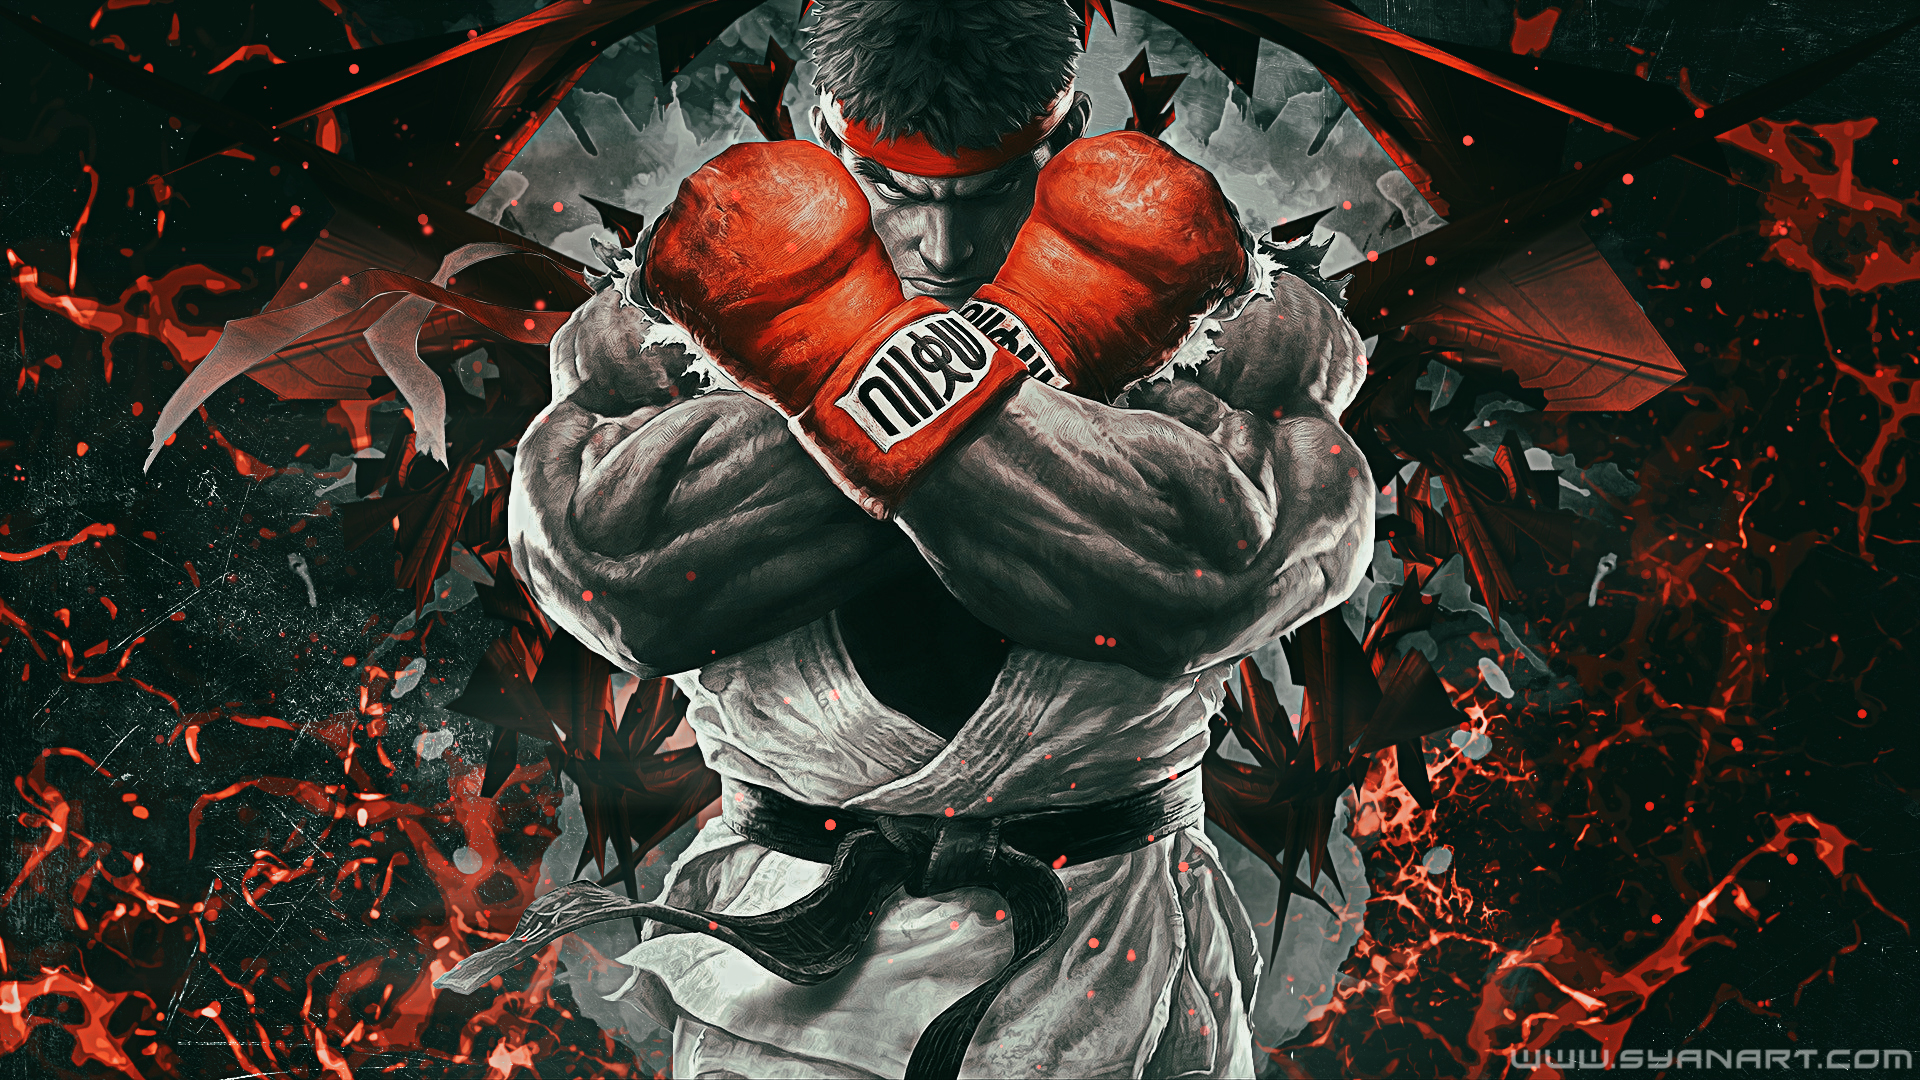 Ryu Street Fighter Wallpaper For Apple iPhone 4s